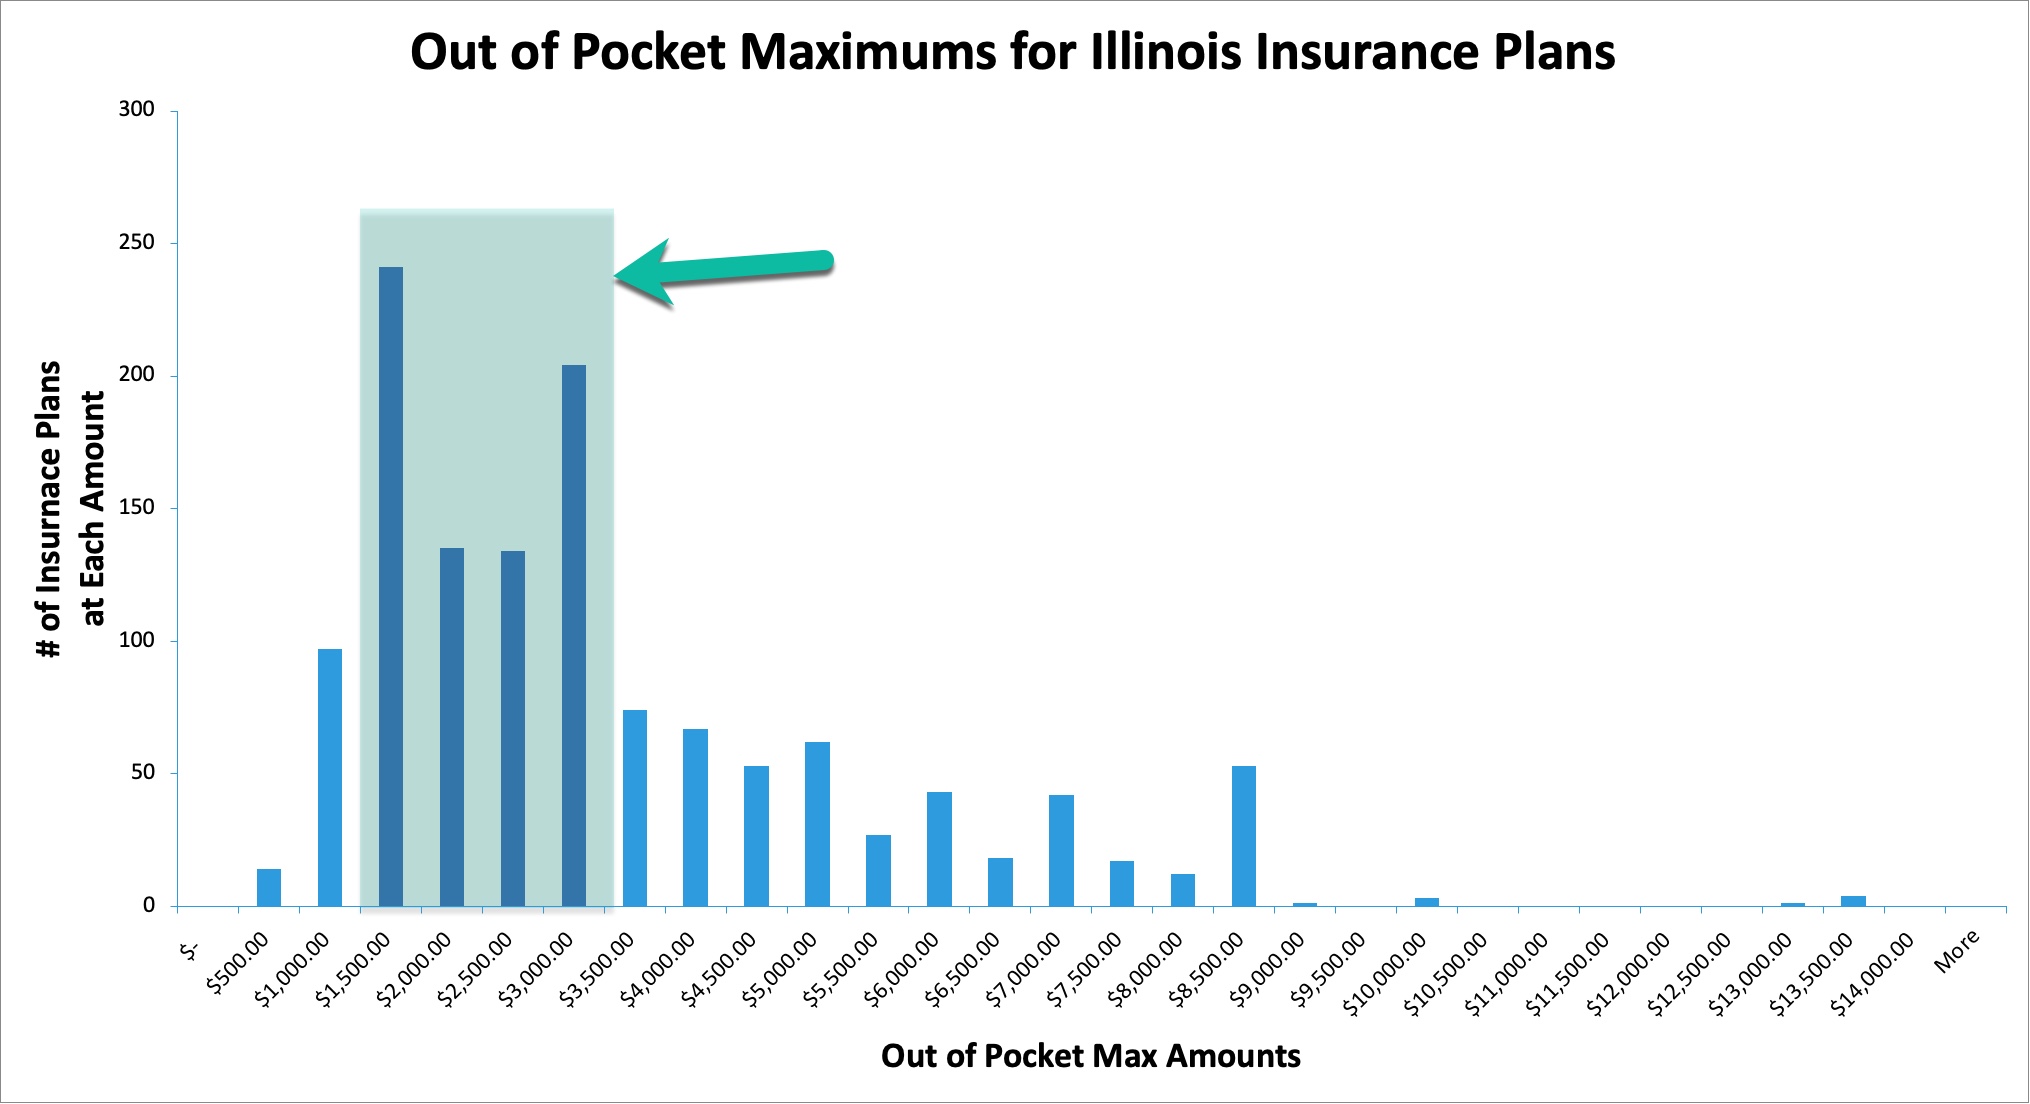 This chart is an image that shows the out of pocket maximums for Illinois Insurance plans for ABA therapy costs